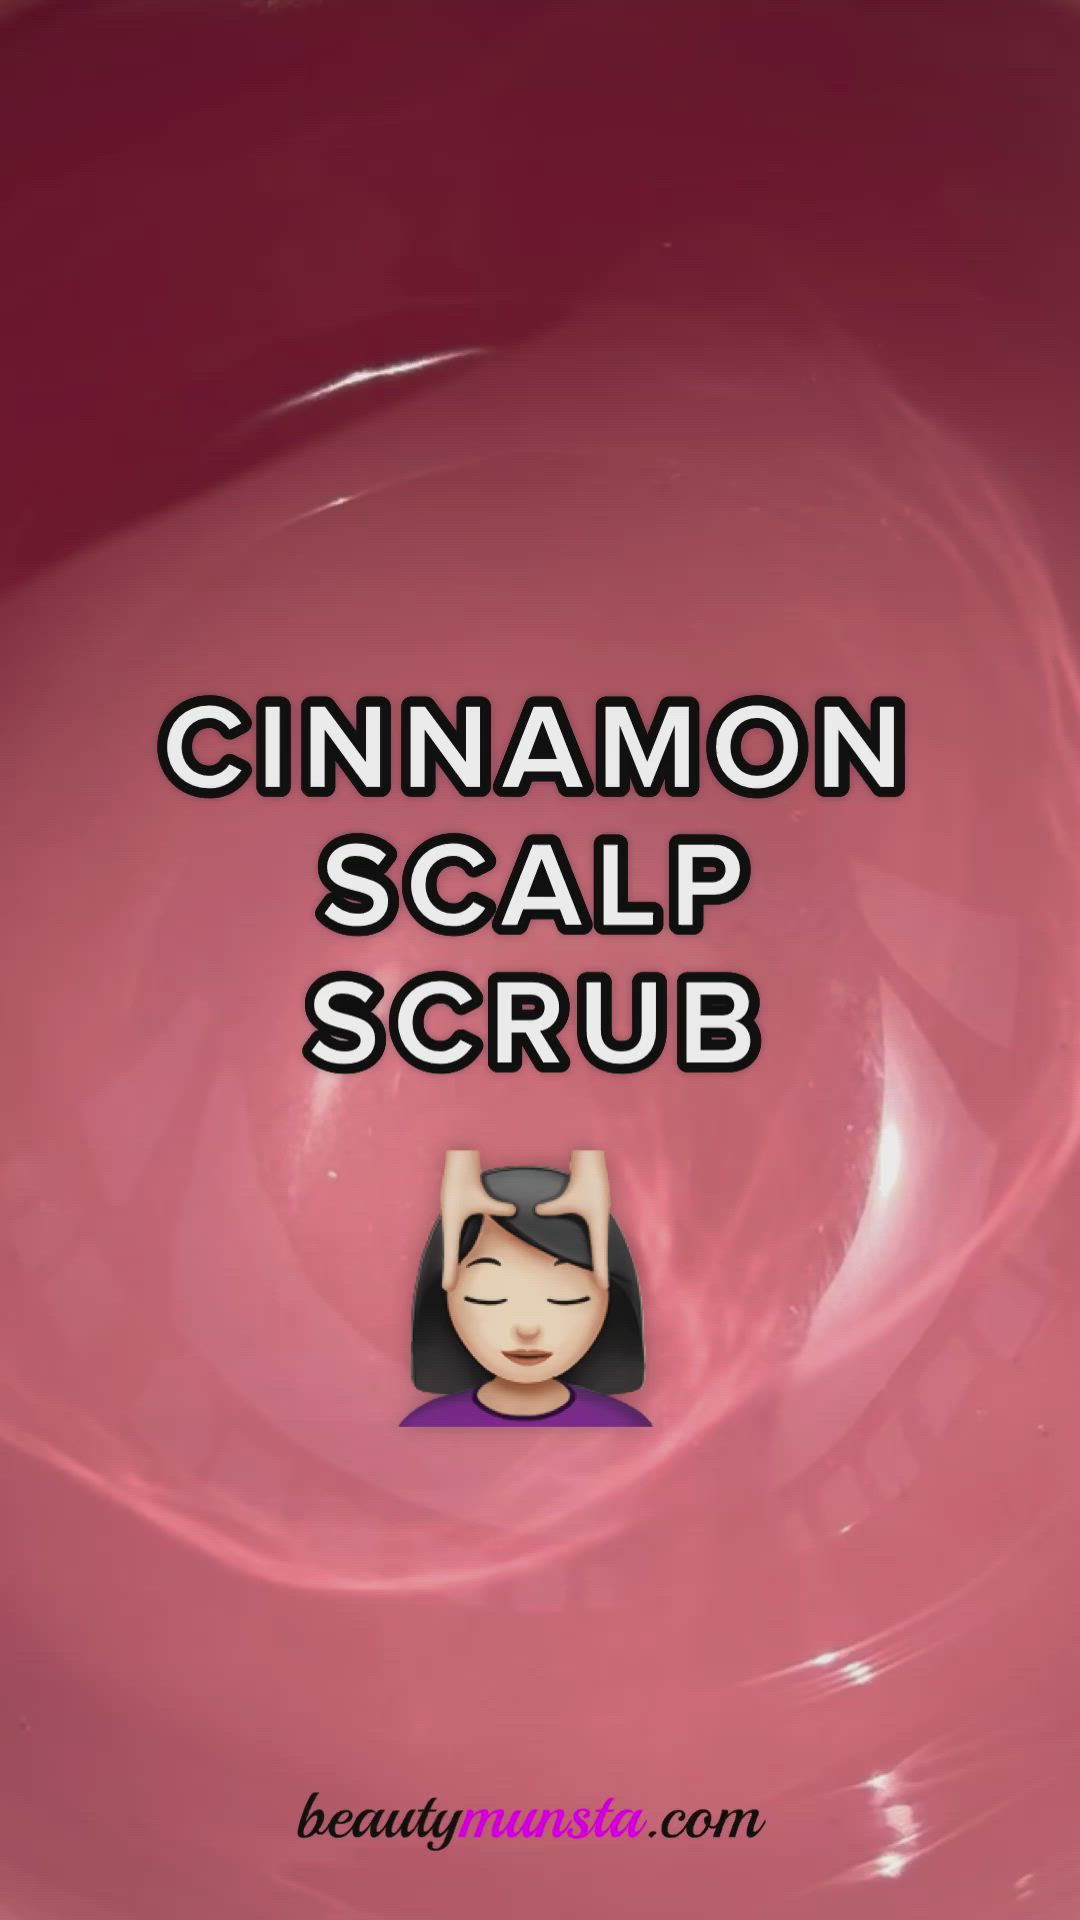 Exfoliating the scalp is a hidden secret to proper hair growth. Exfoliation unclogs pores and buffs away dead skin cells and product or pollution build-up. Use this cinnamon scalp scrub to deep cleanse hair follicles and promote unrestricted hair growth.